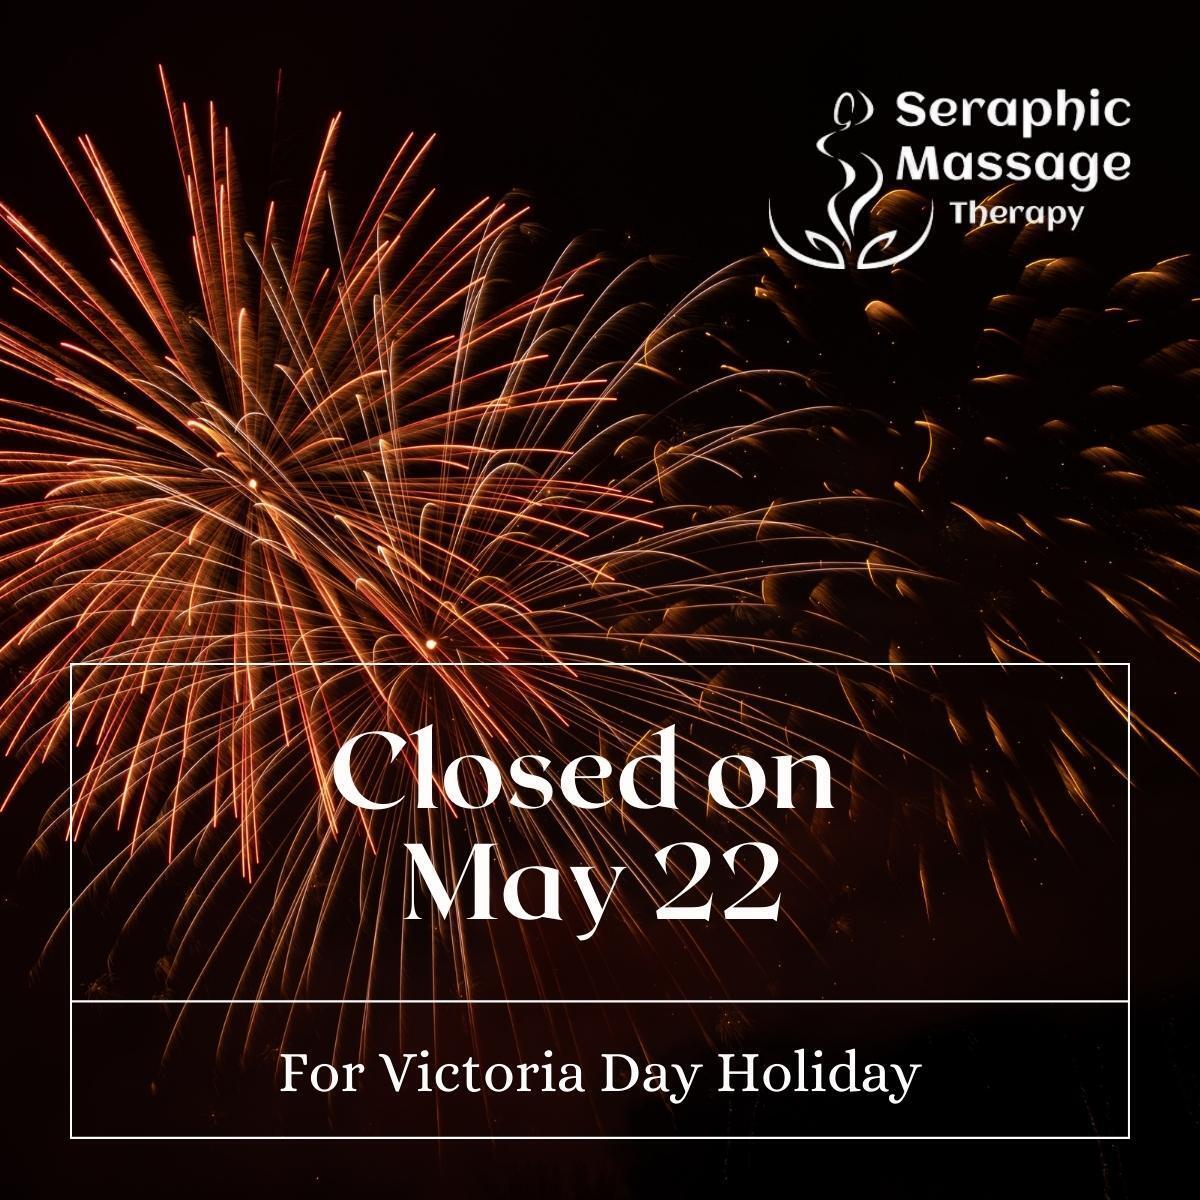 Just a friendly reminder that we will be closed for the Victoria Day holiday on May 22. Book your appointment now!

seraphicmassage.com

#RMT #massagetherapy #stressrelease #treatyourselftohealth #roncesvalles #parkdale #torontoRMT #brocktonvillage #the6ix #collegestreet #Jun